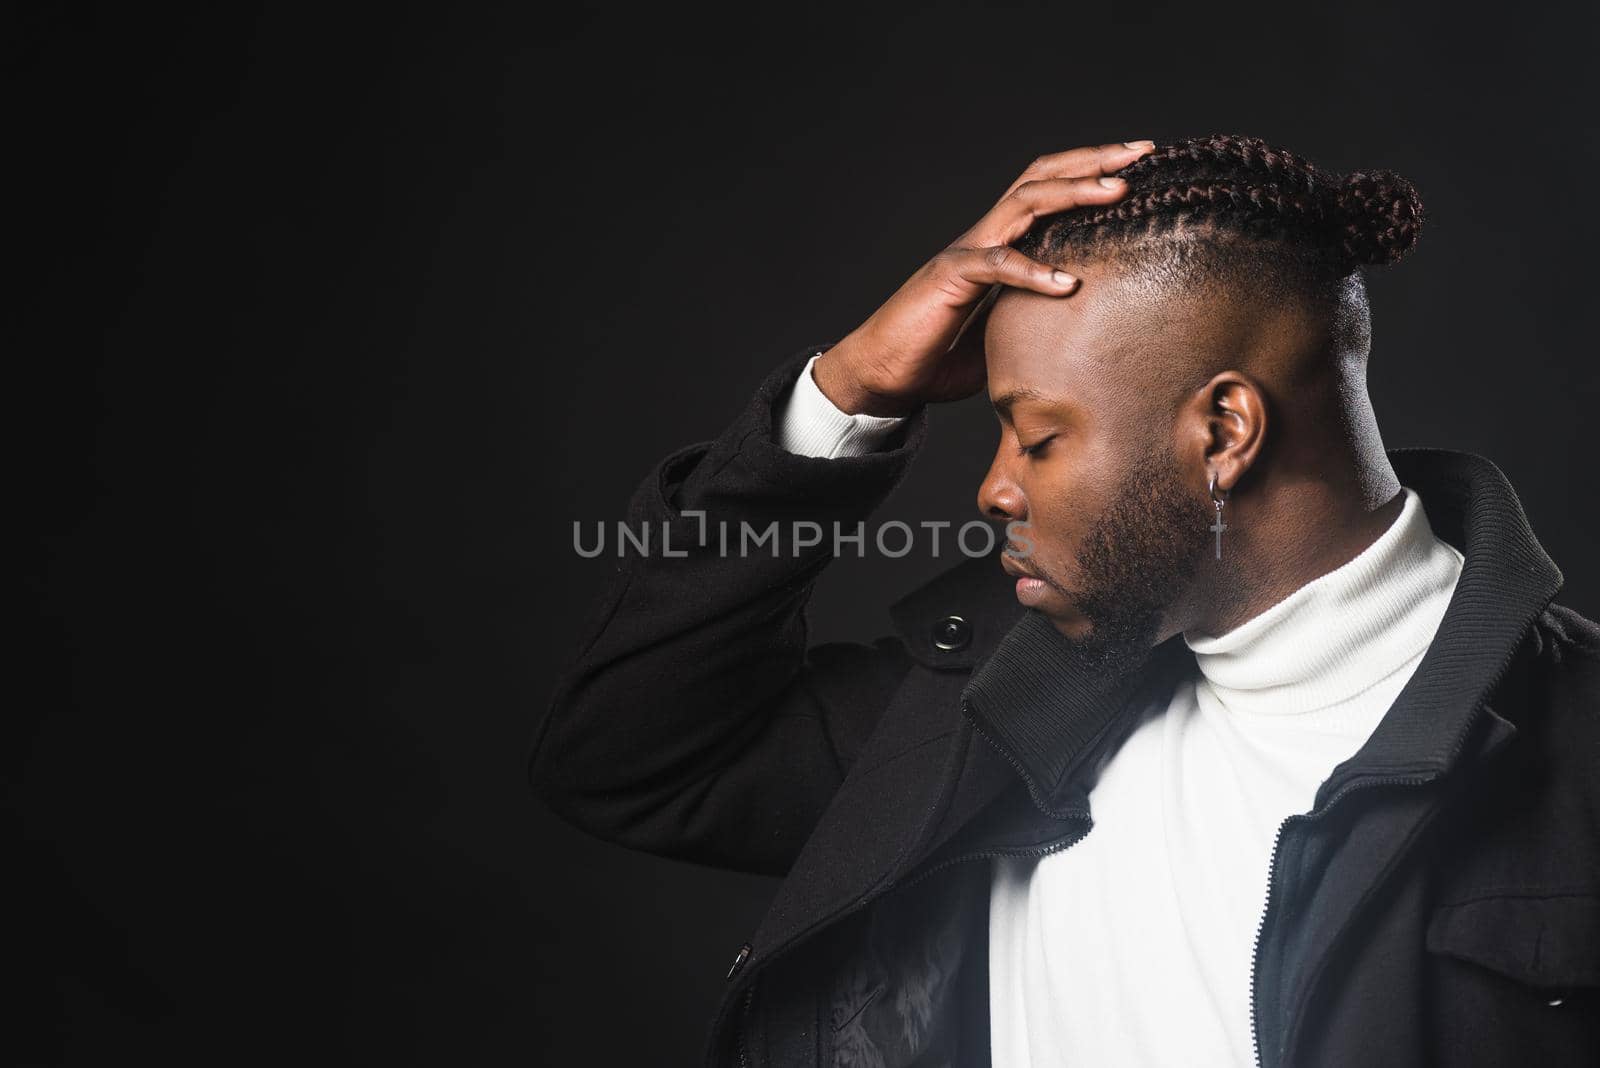 Black man in profile with hand on forehead. Close up. Black background.